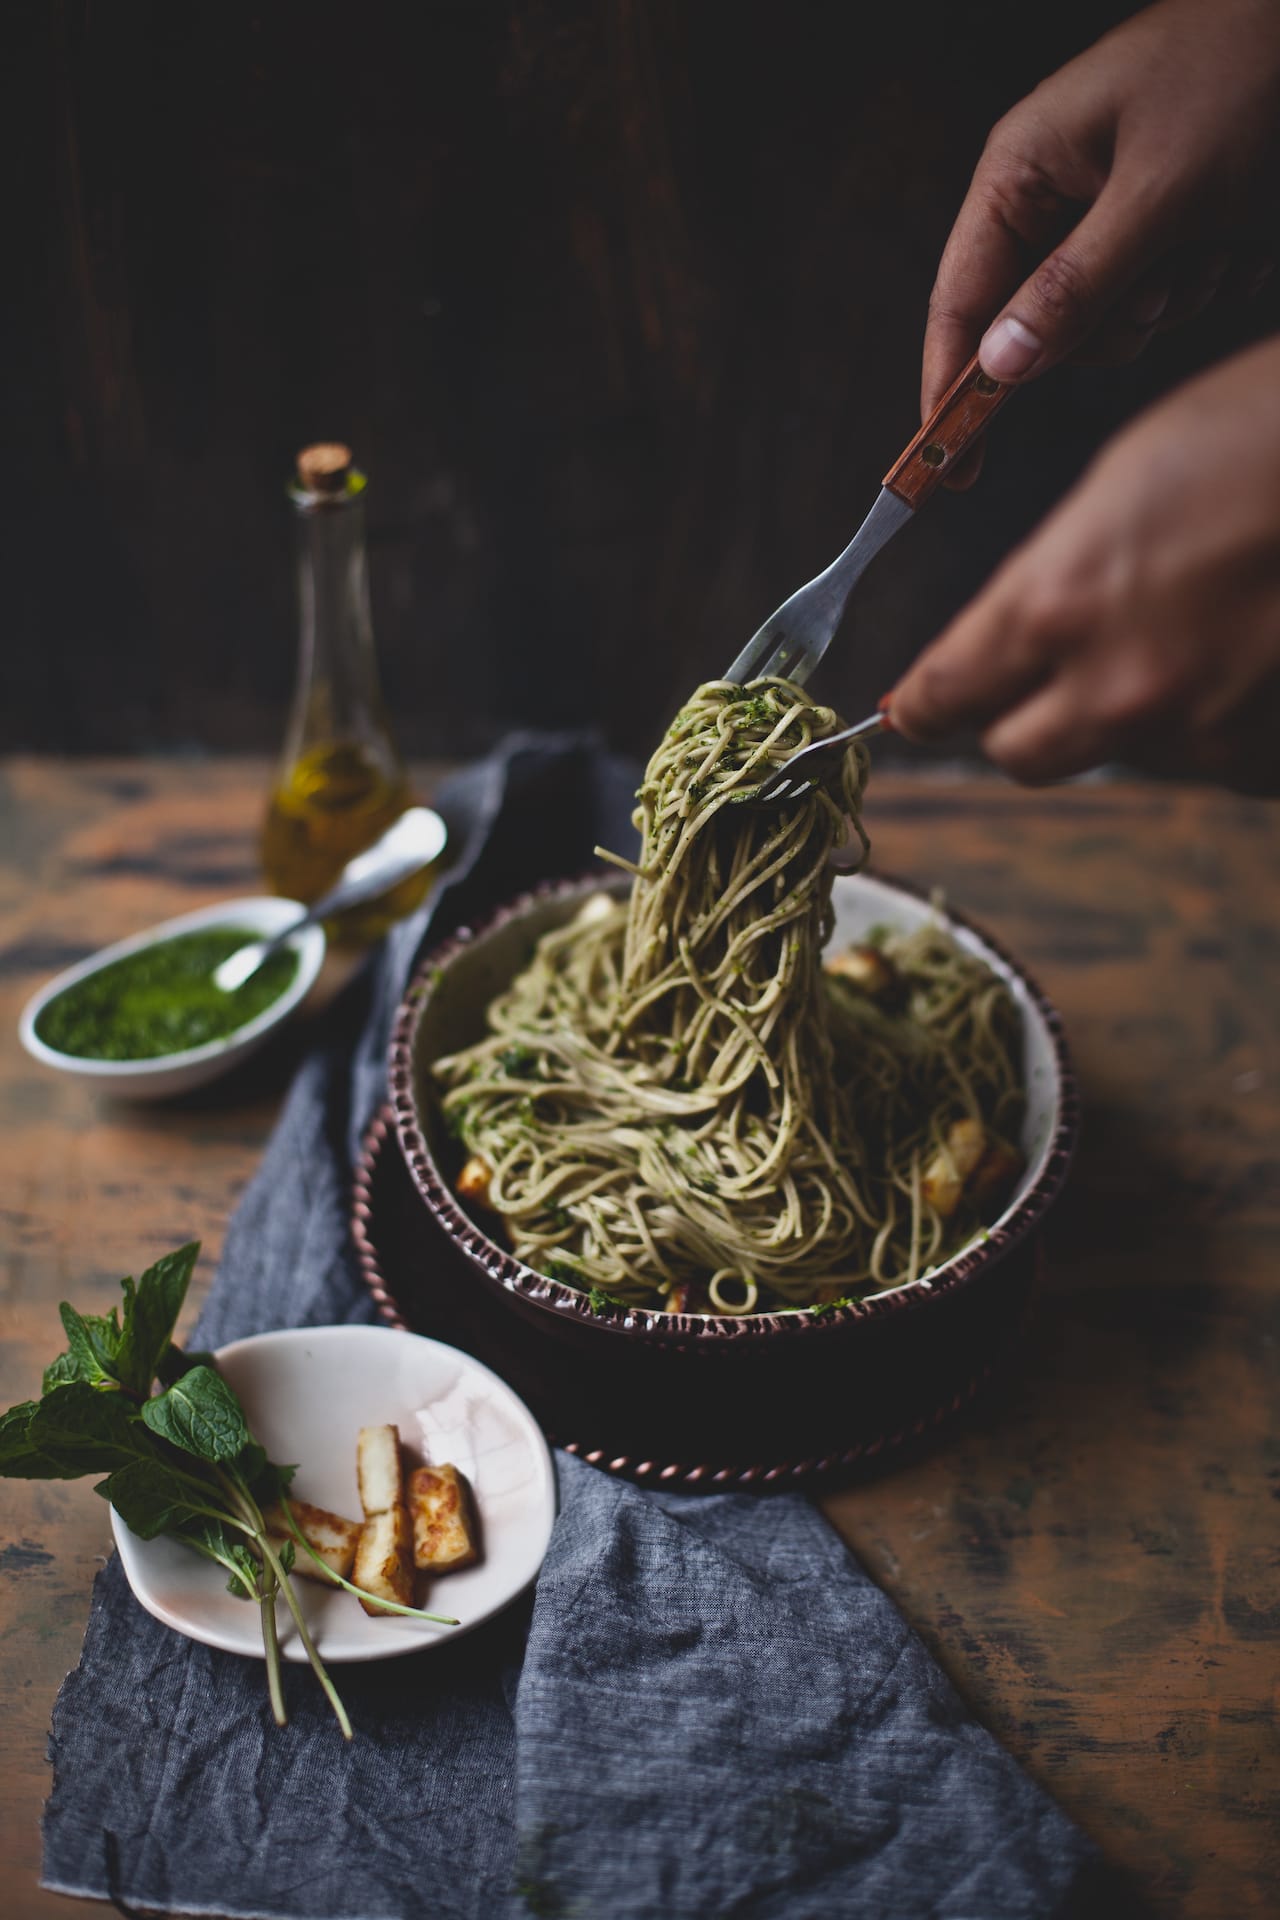 Soba Noodle With Chimichurri And Paneer | Playful Cooking